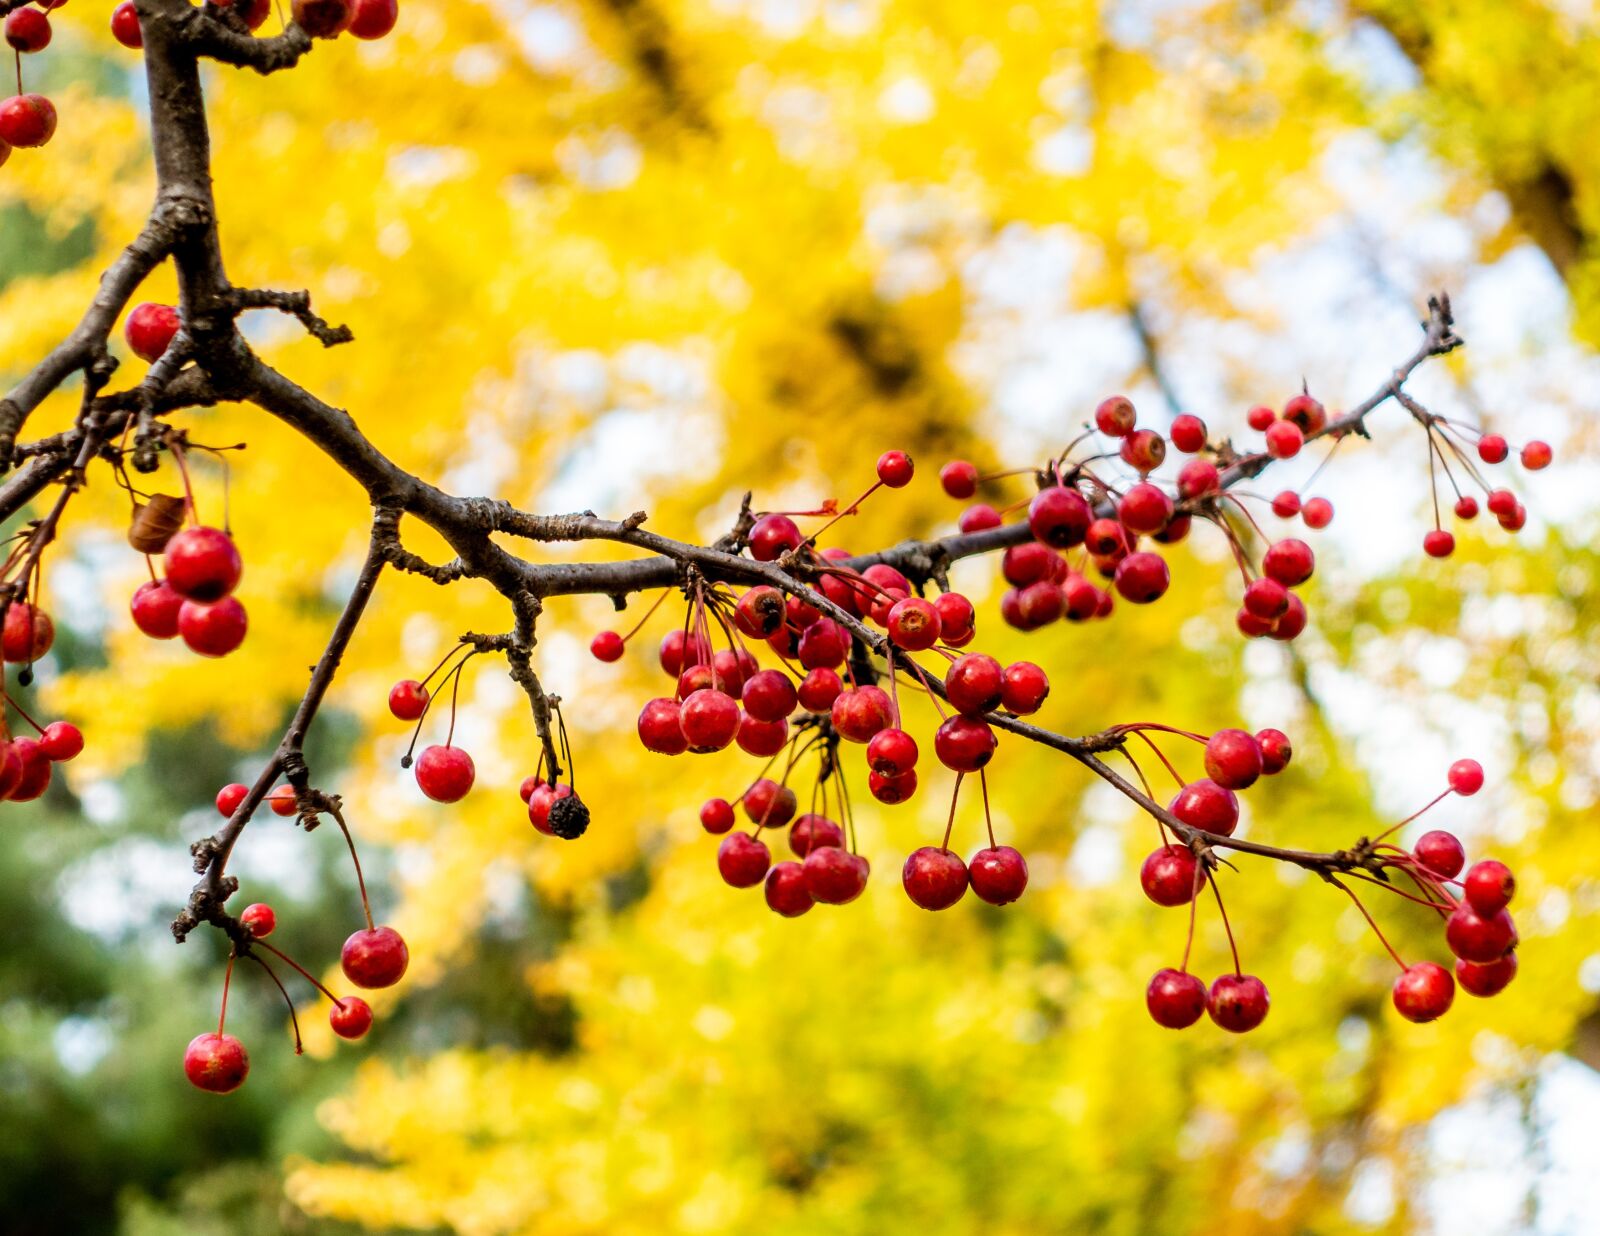 Sony Cyber-shot DSC-RX100 III sample photo. Autumn, berries, red photography